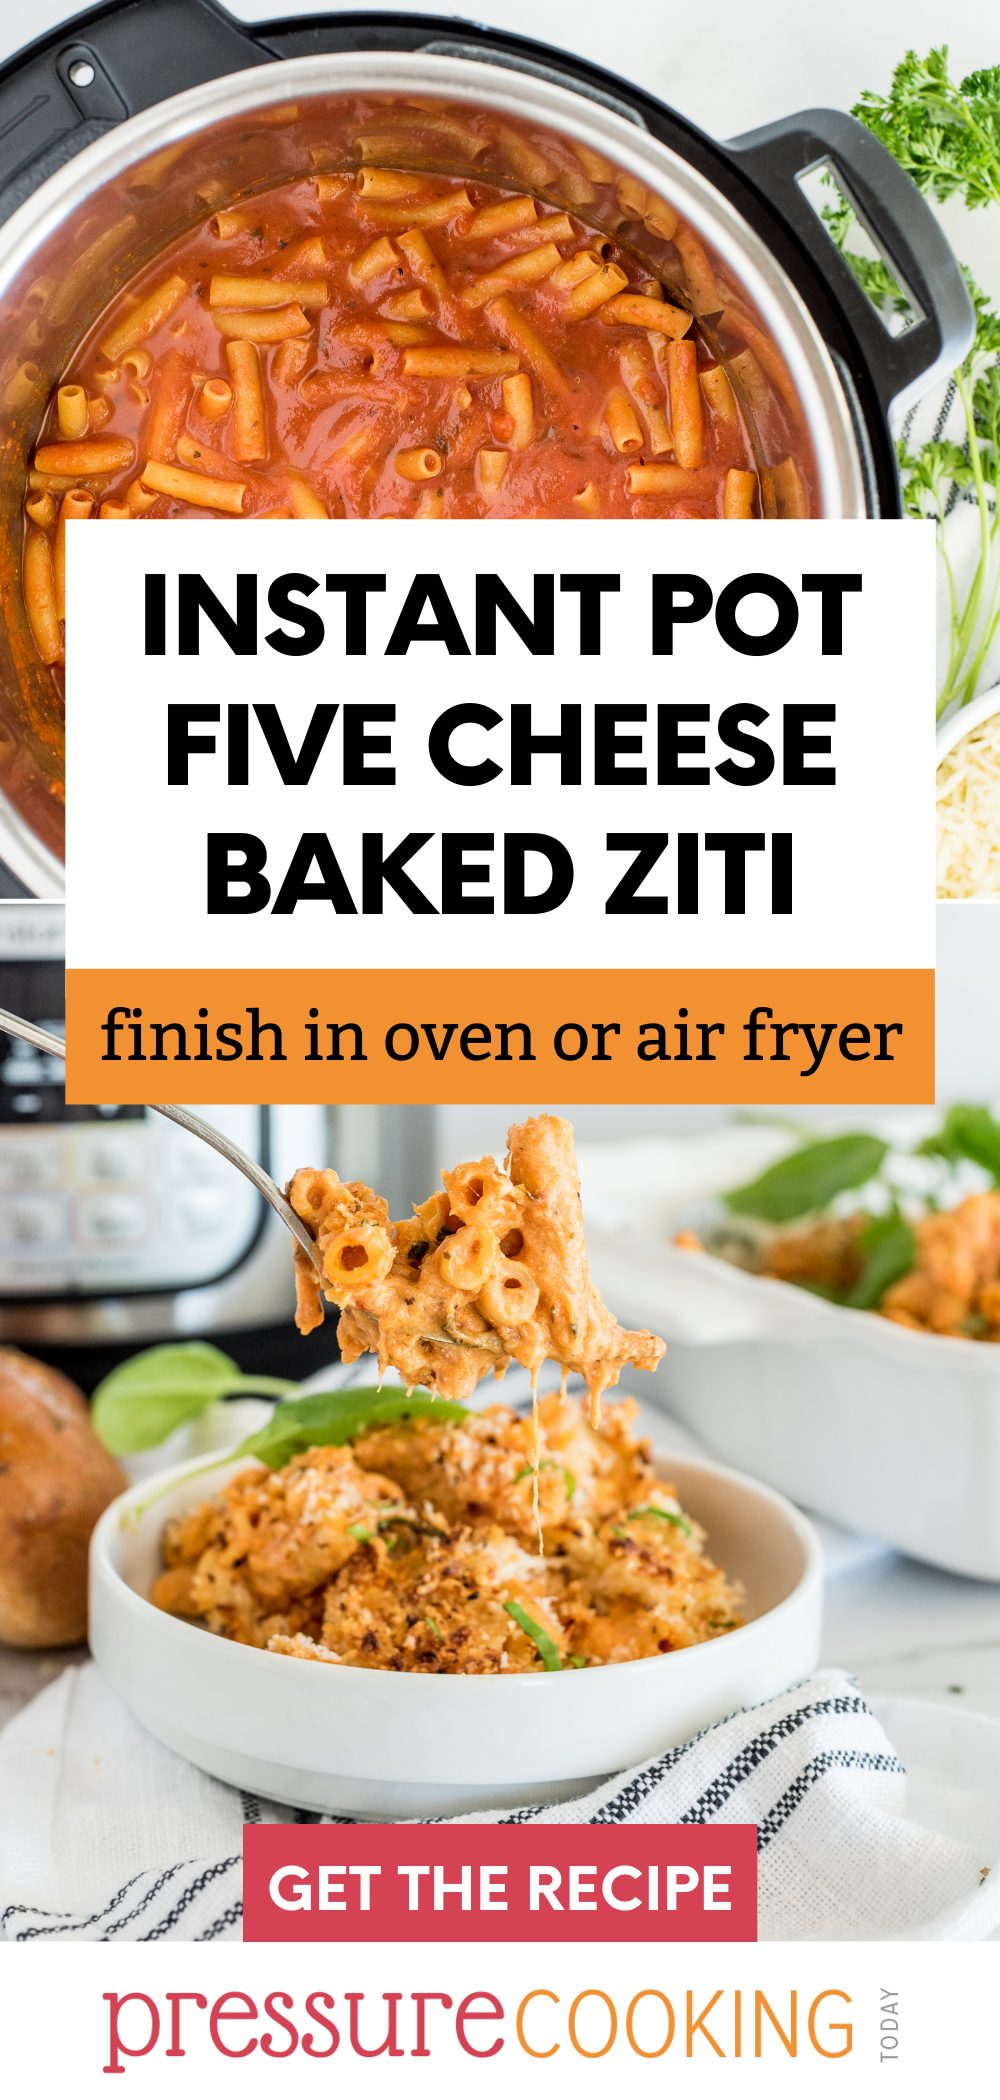 A two-image pinterest pin promoting Instant Pot five cheese baked ziti. The top image shows the pasta in the Instant Pot before cooking, the bottom image shows a spoonful of the ziti in front of an Instant Pot. via @PressureCook2da